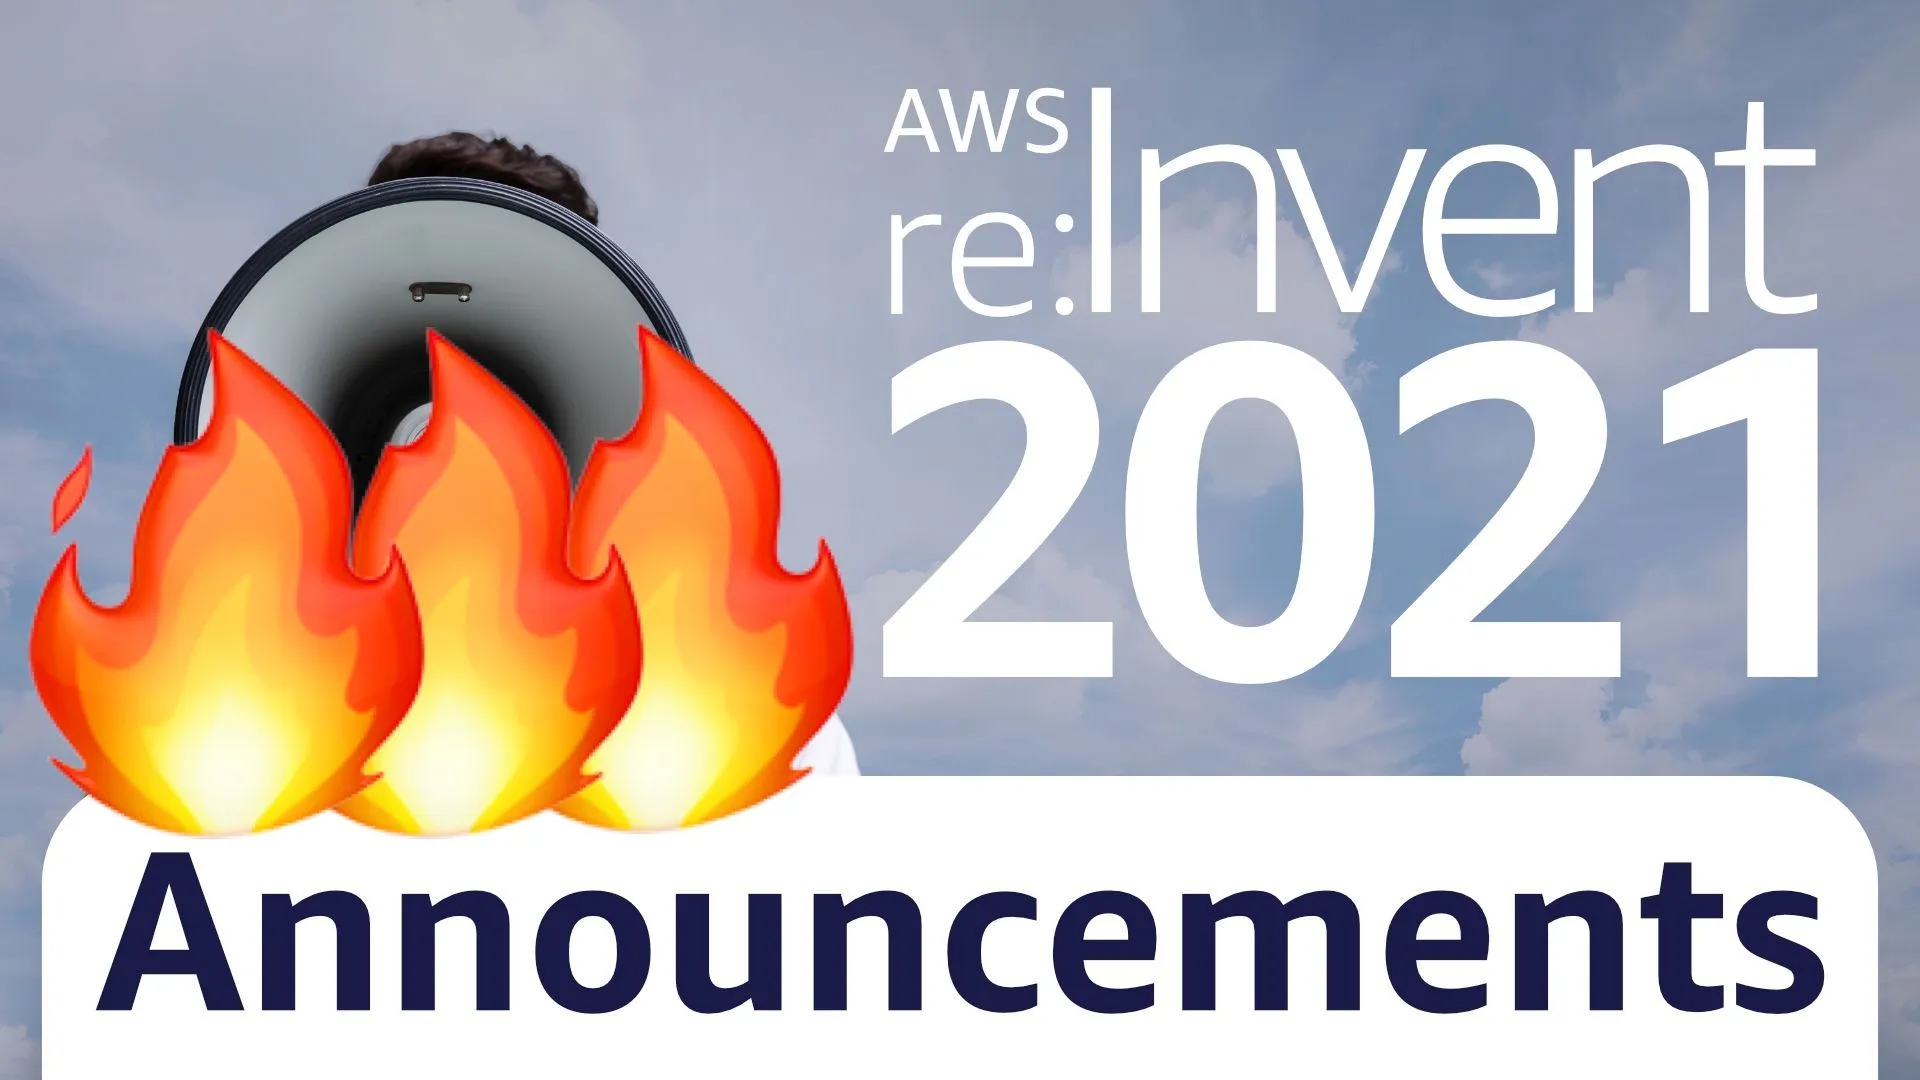 The Top AWS re:Invent Announcements